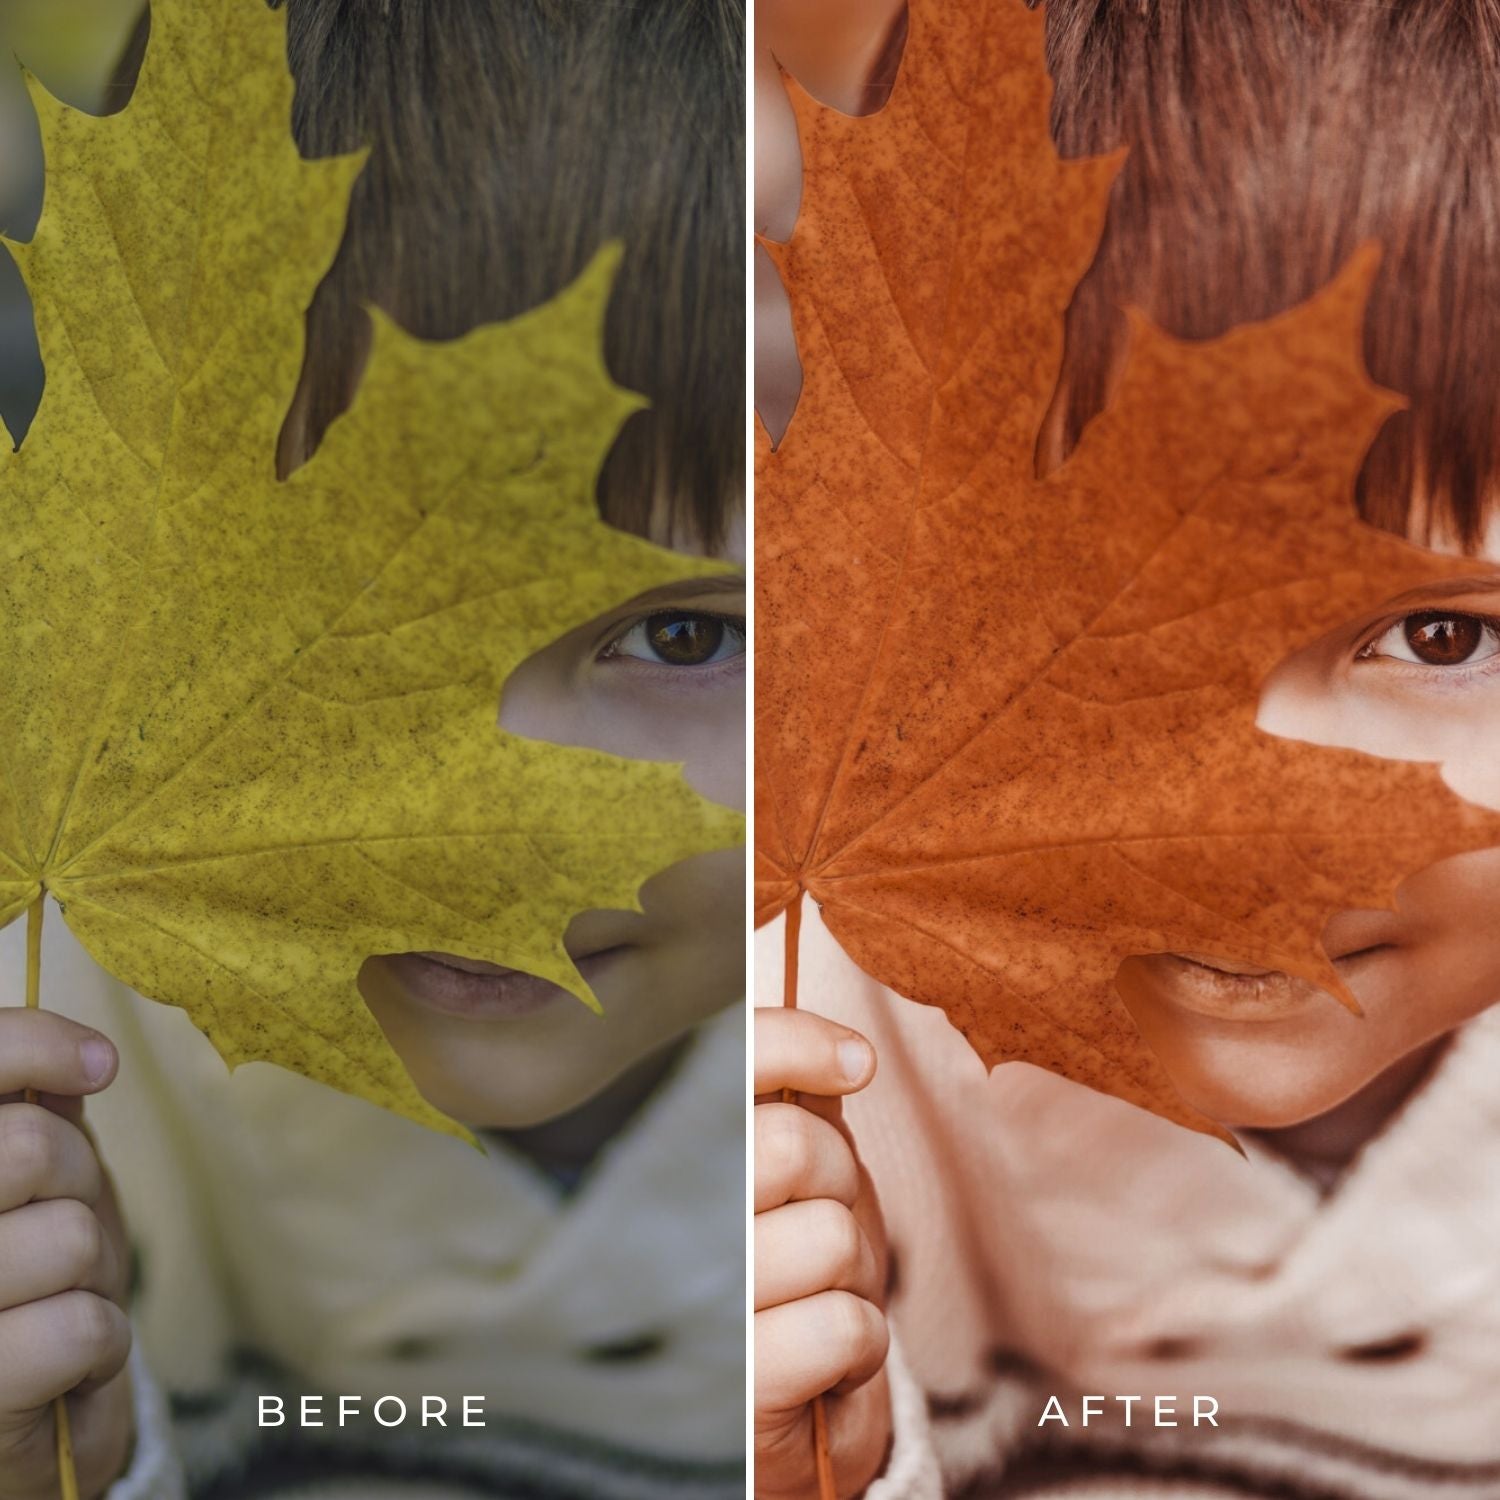 FALL | Presets by Maxine Stevens